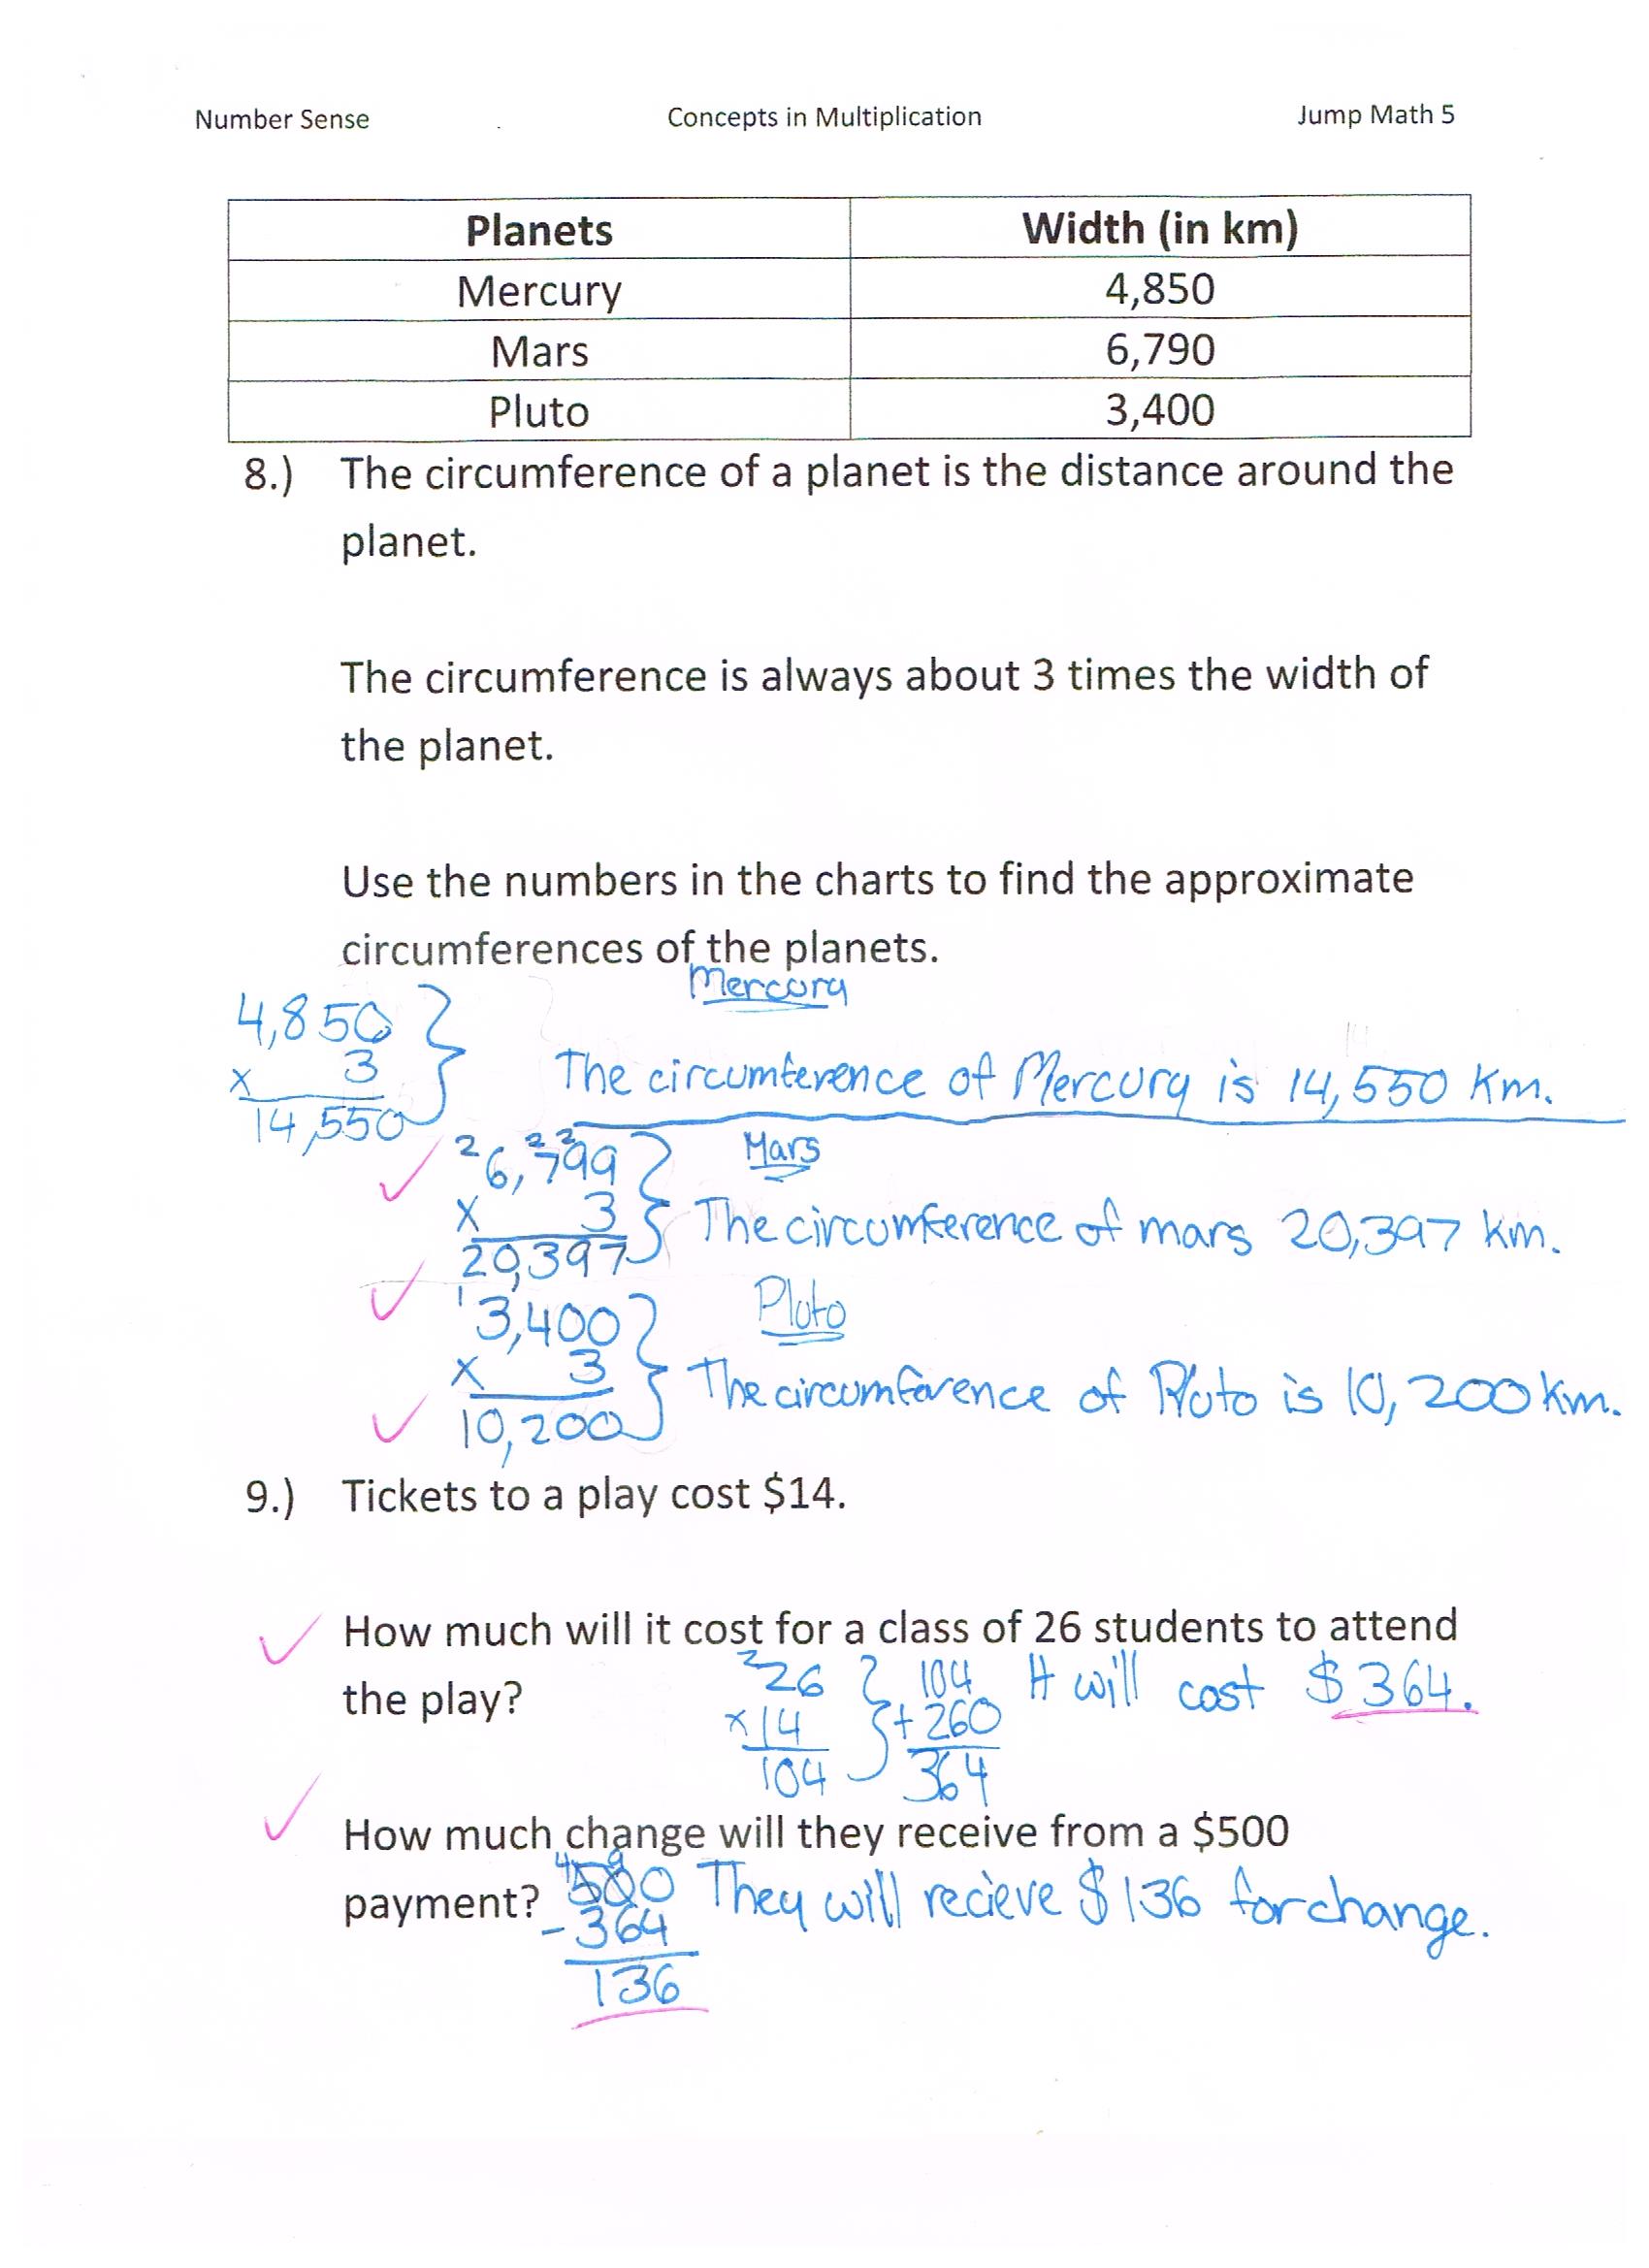 jump math 5 1 number sense multiplication page 77 jessica s school work projects